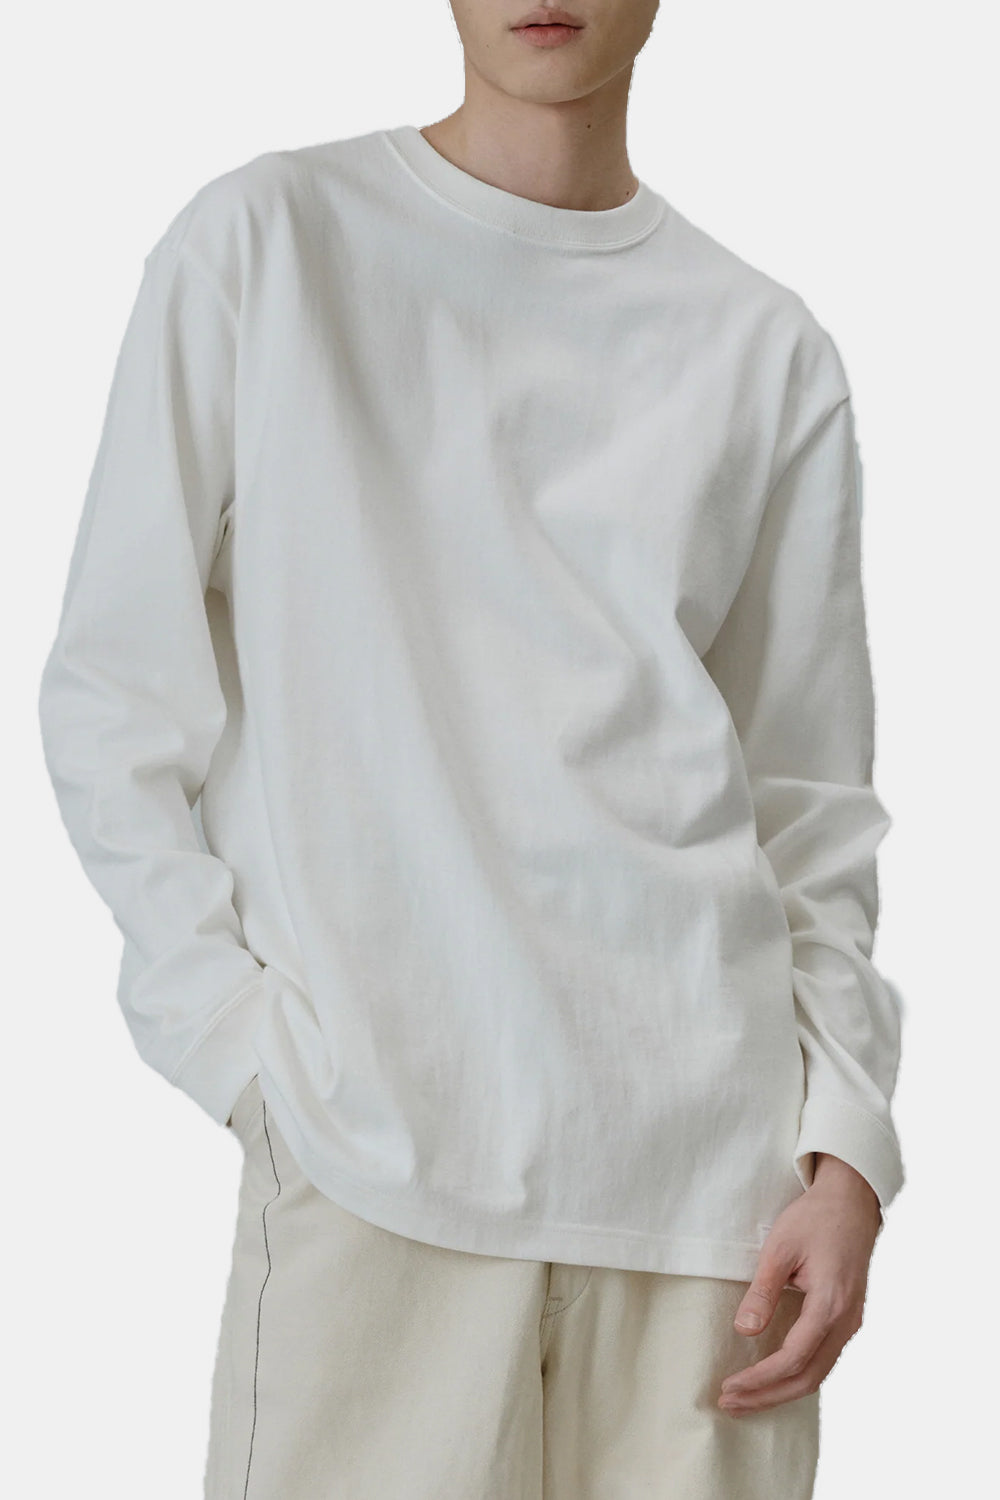 United Athle Japan Made Standard Fit Long Sleeve T-shirt (White)